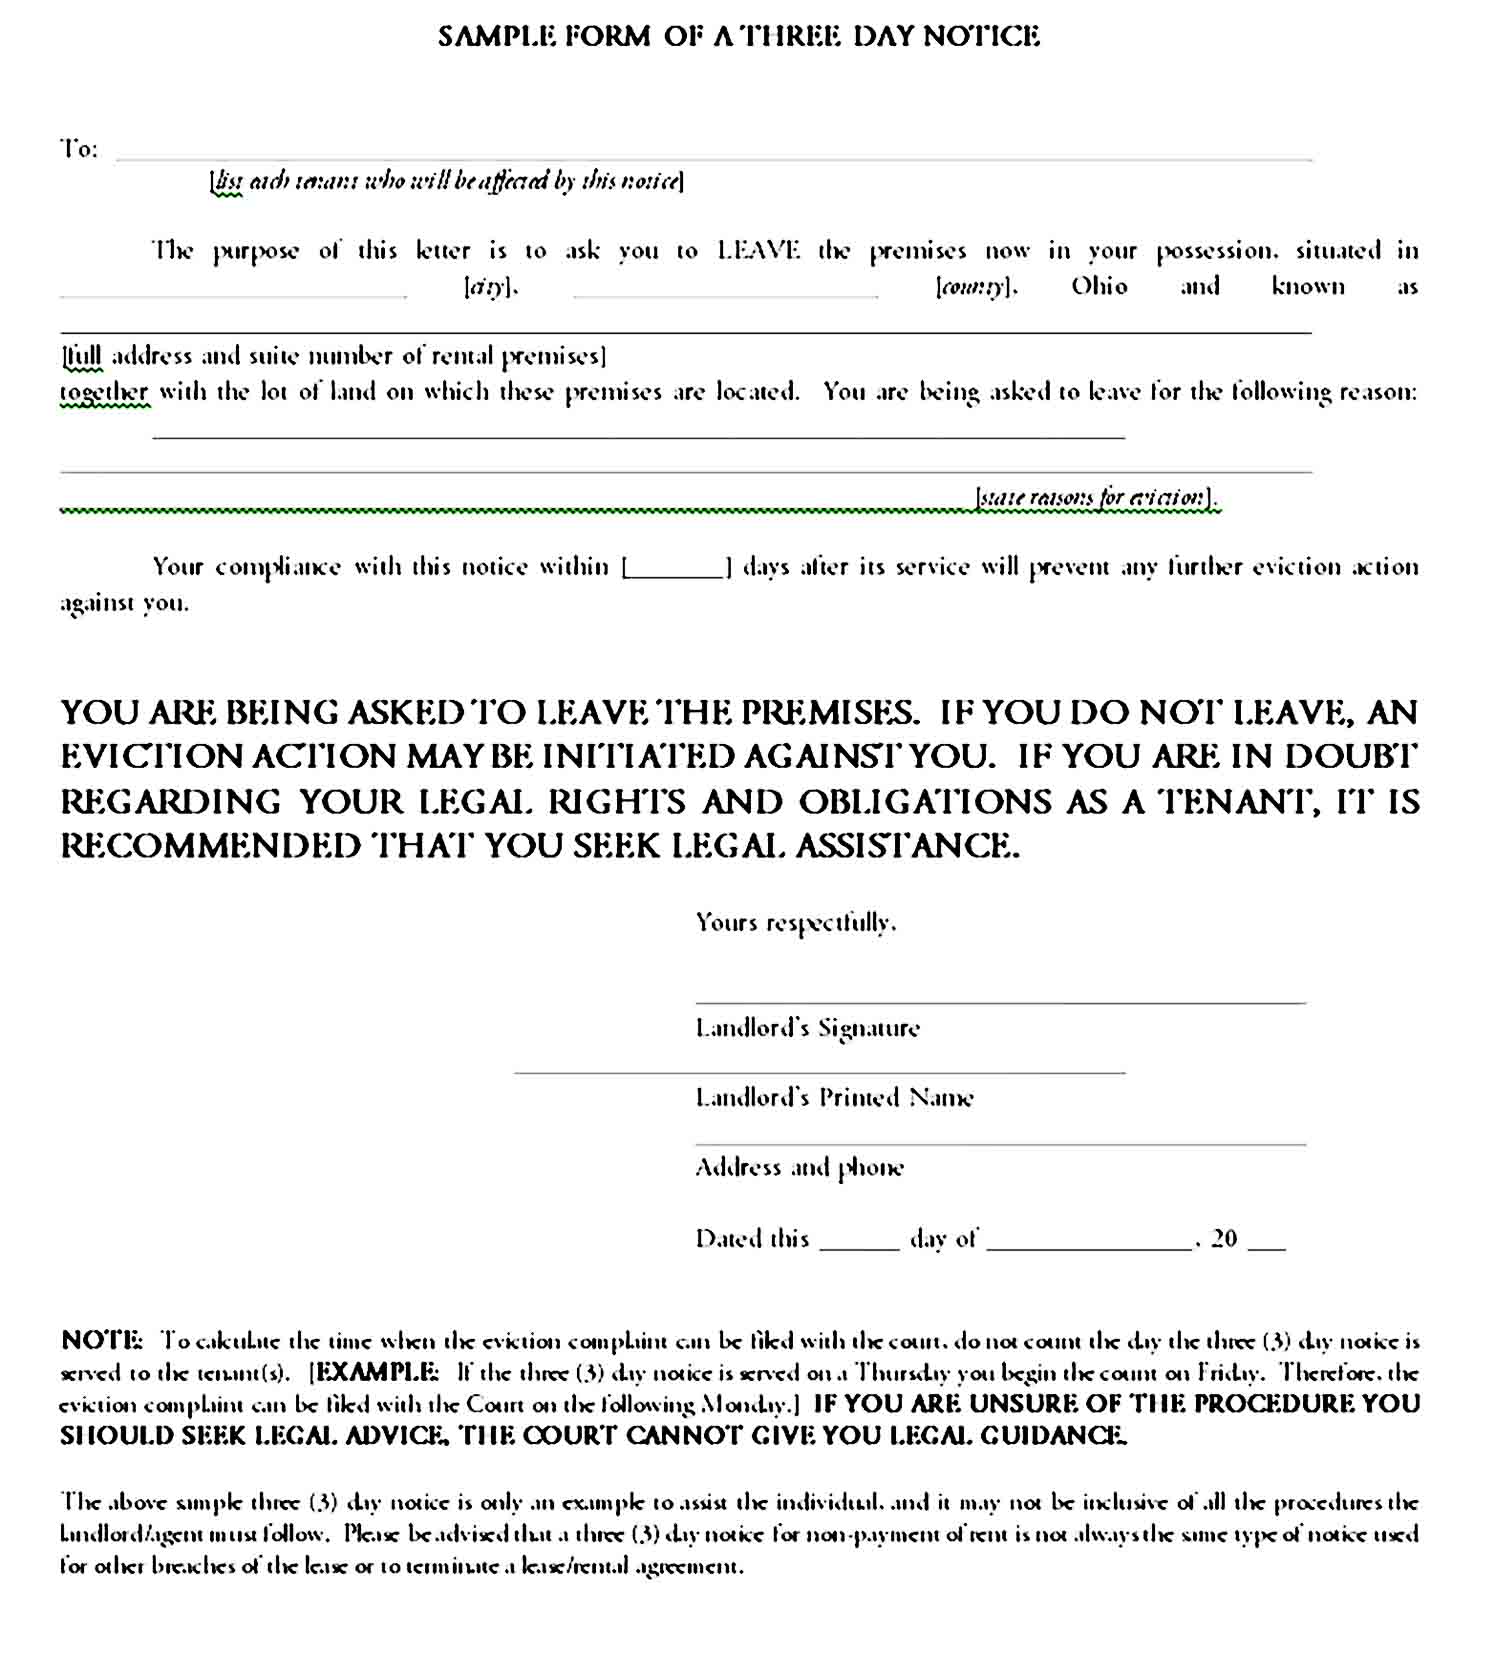 Sample form of a three day notice